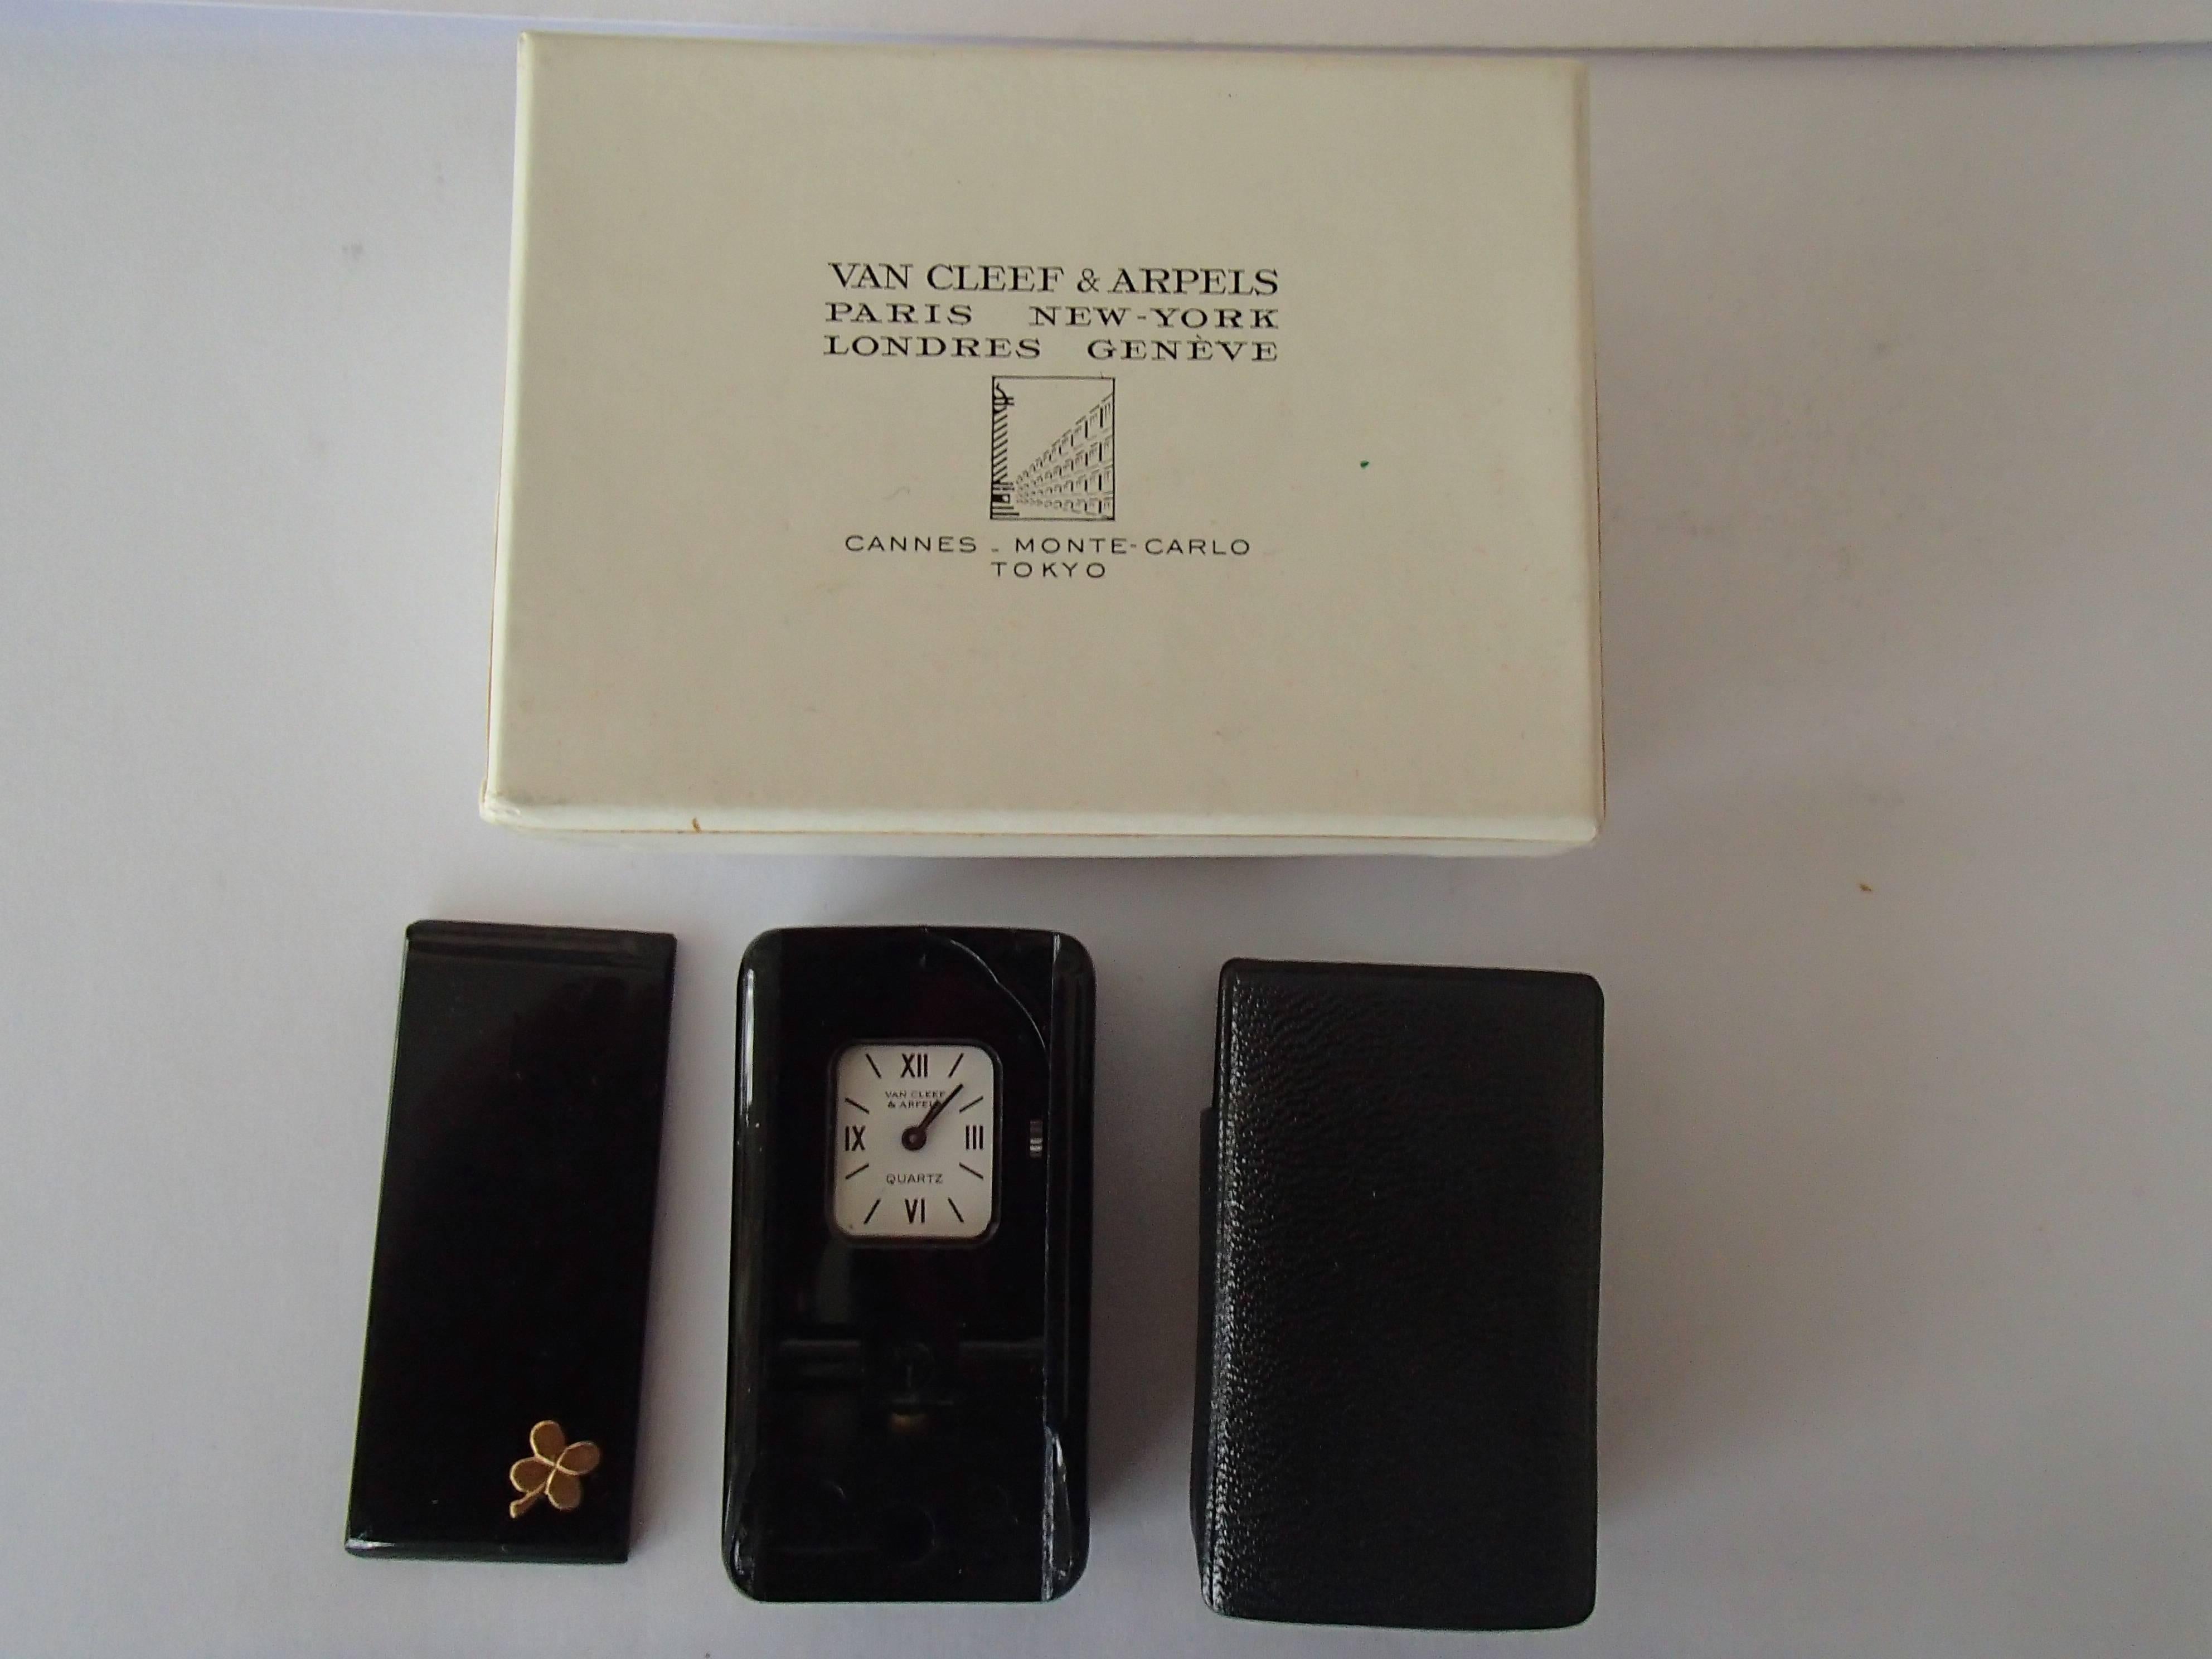 Modern travelling clock by Van Cleef & Arpels foldable in case and original box.